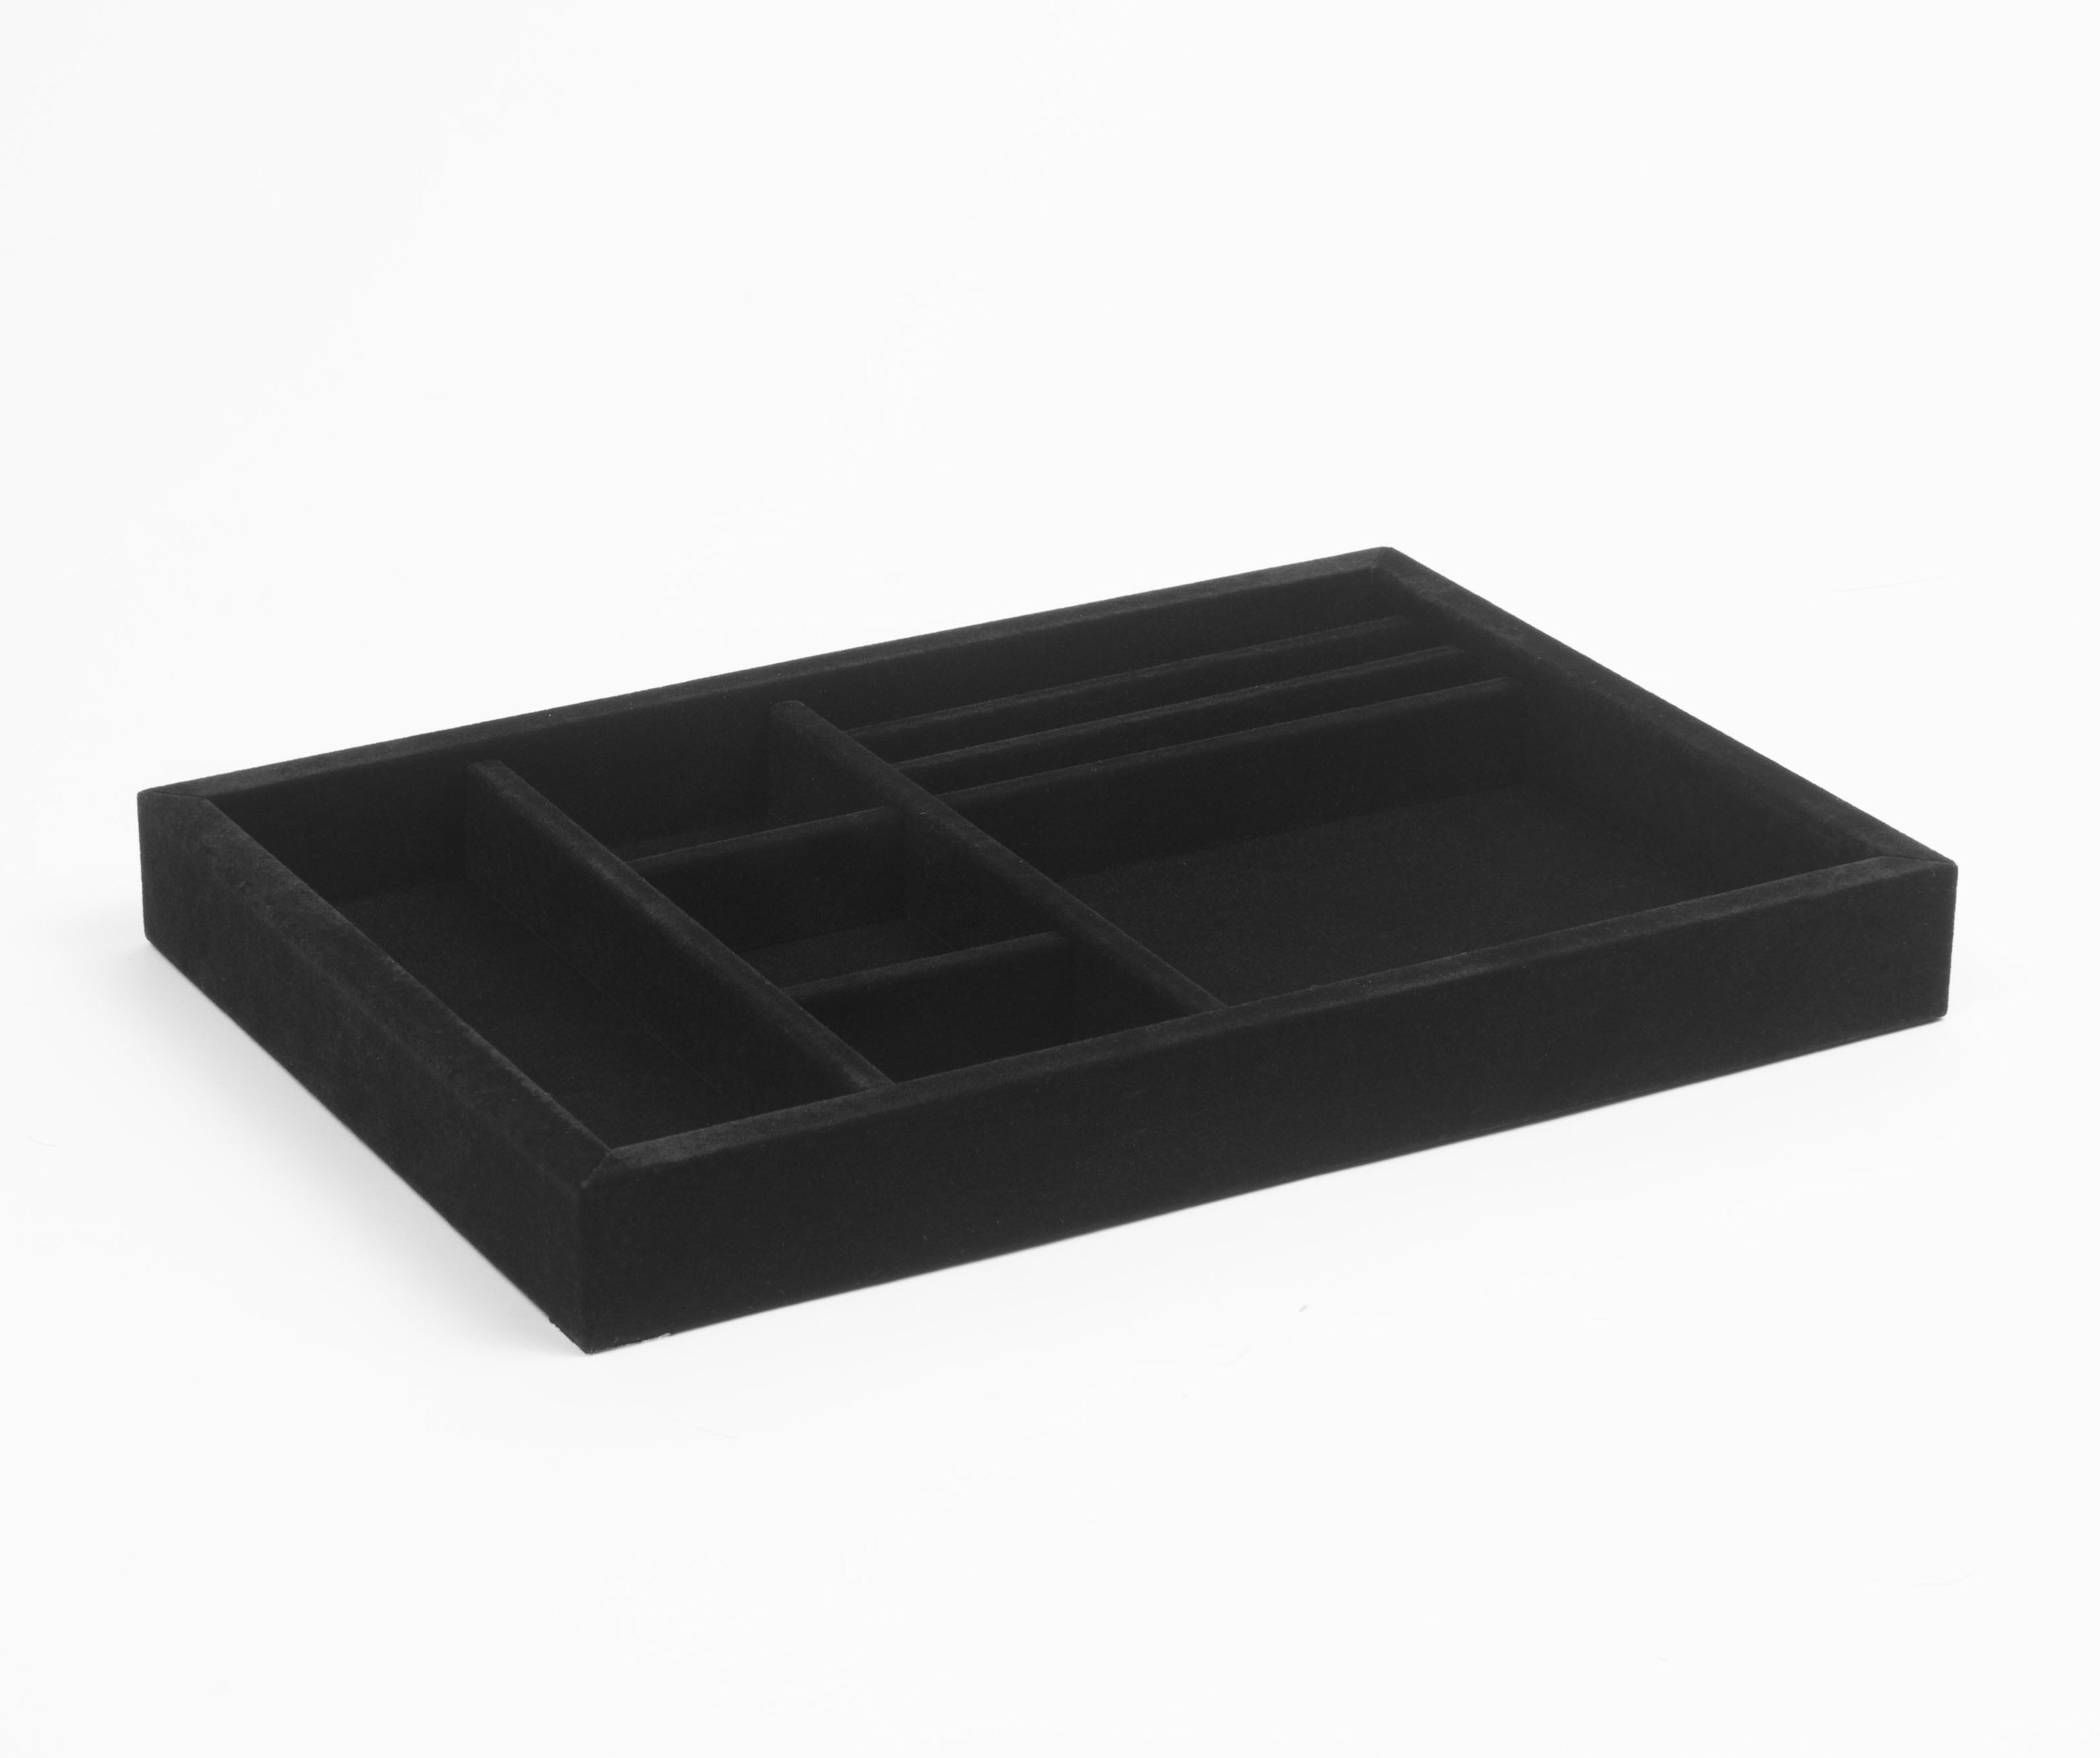 An angled black empty Fire Safe Tray